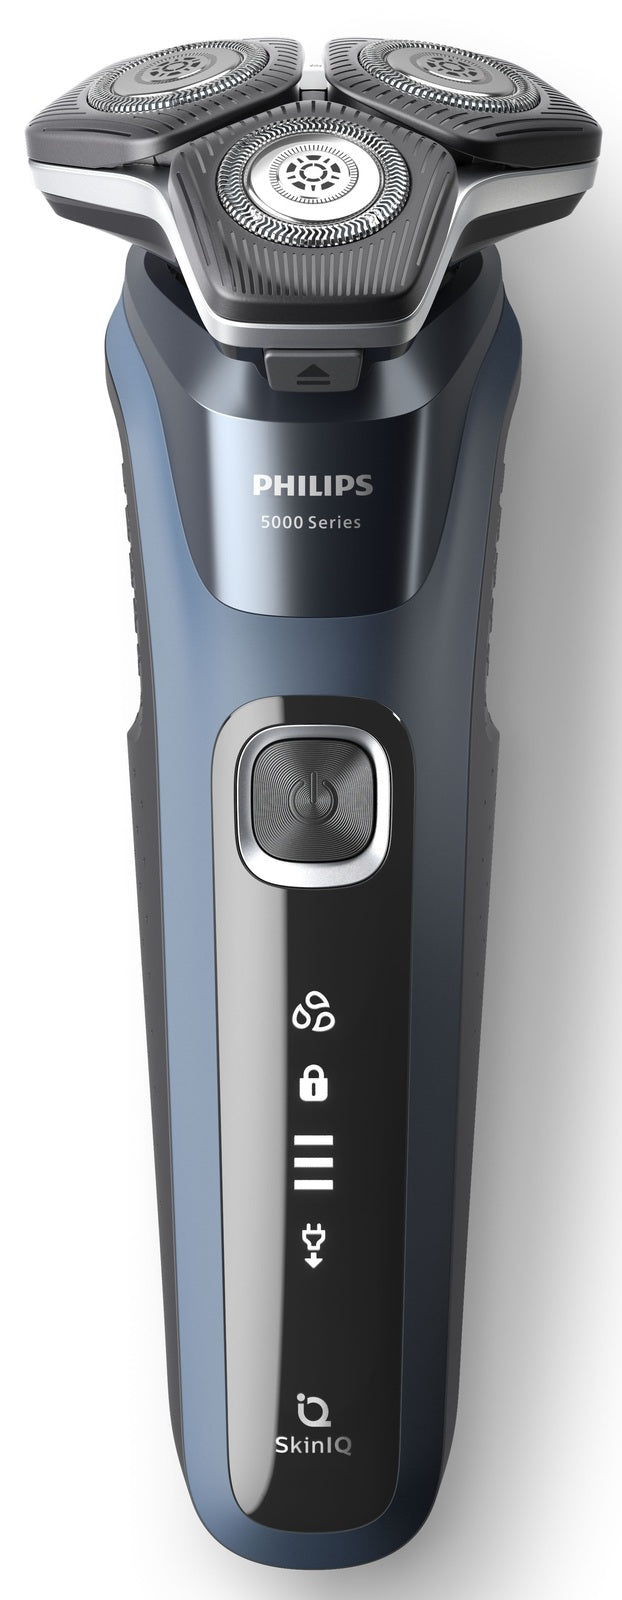 Philips: Wet & Dry Series 5000 SkinIQ Electric Shaver (S5880/20)